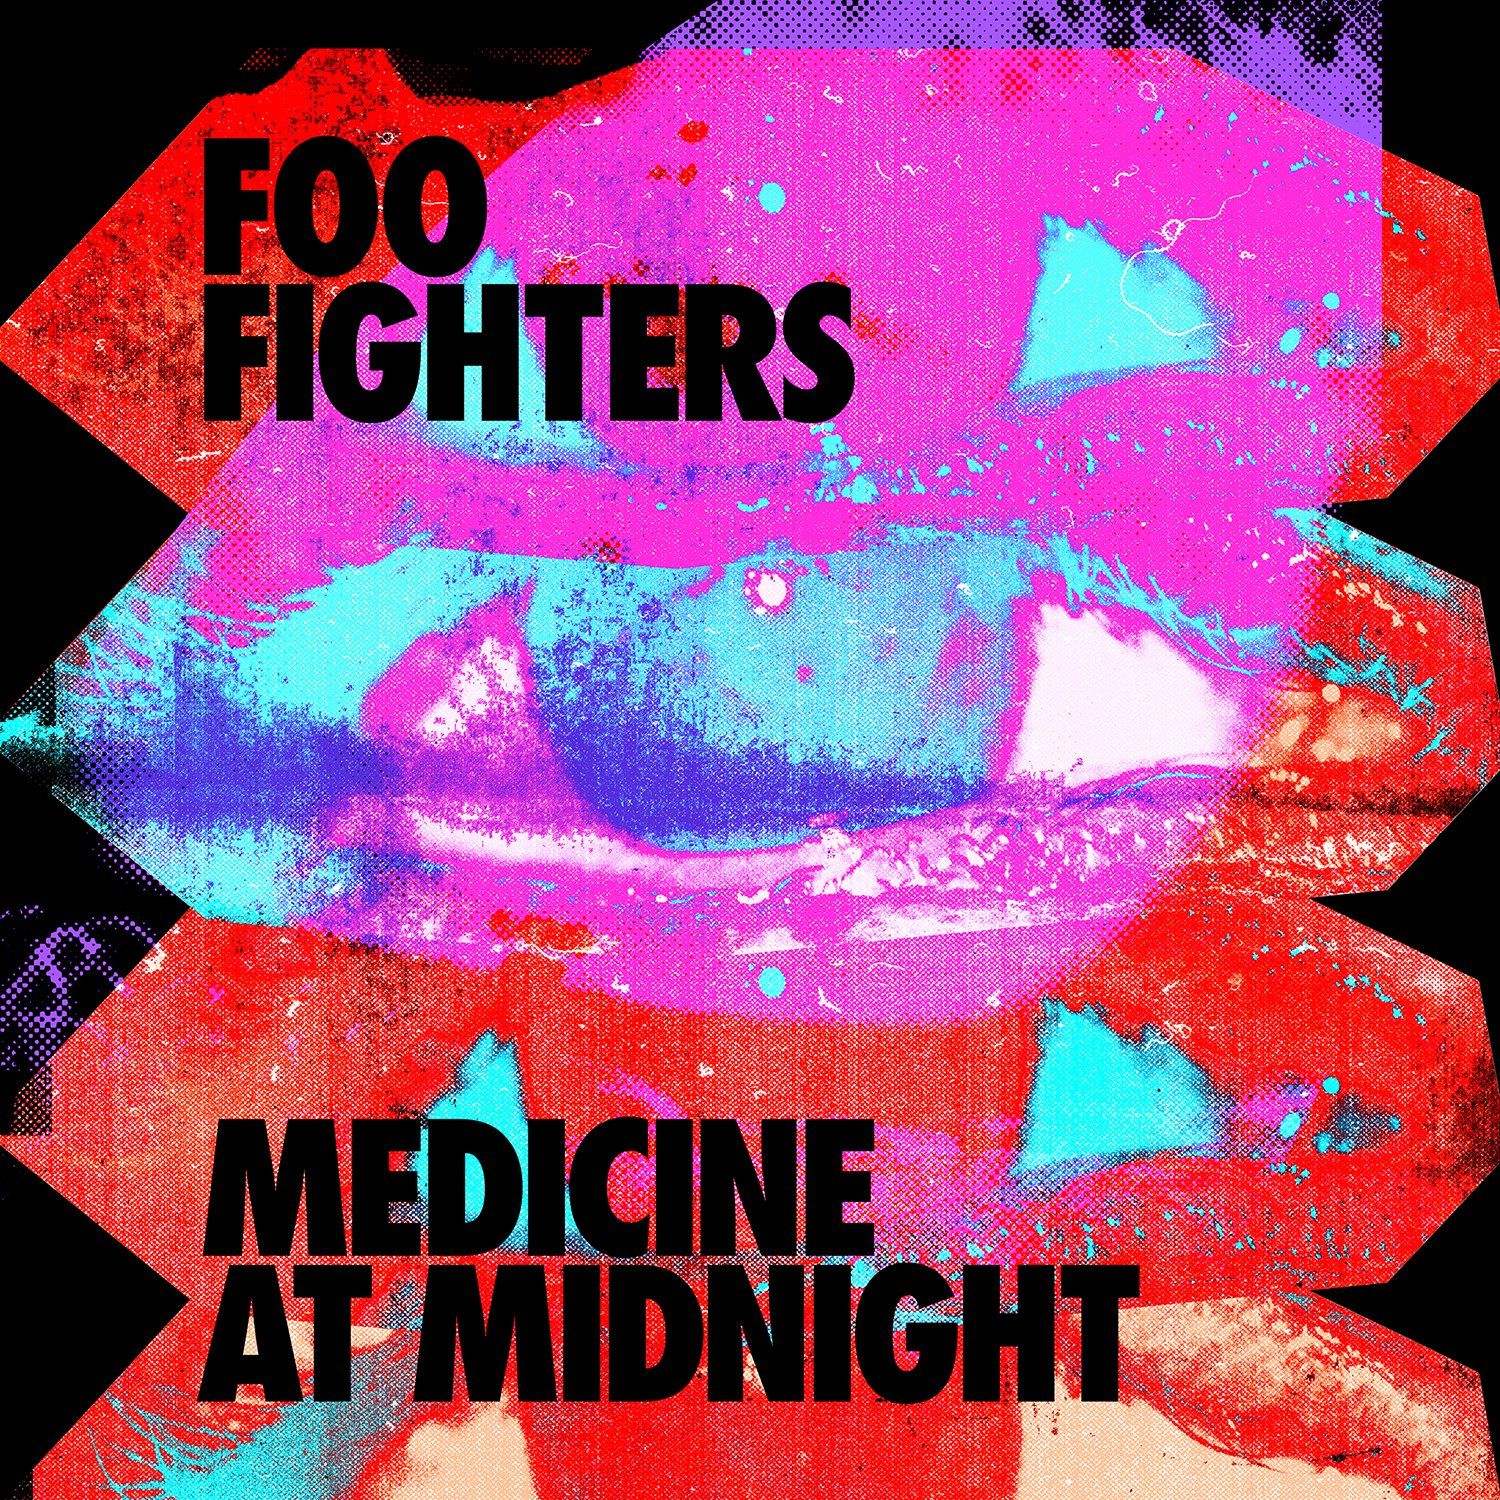 Foo Fighters launch new single Shame, Shame, says album Medicine at Midnight coming in 2021